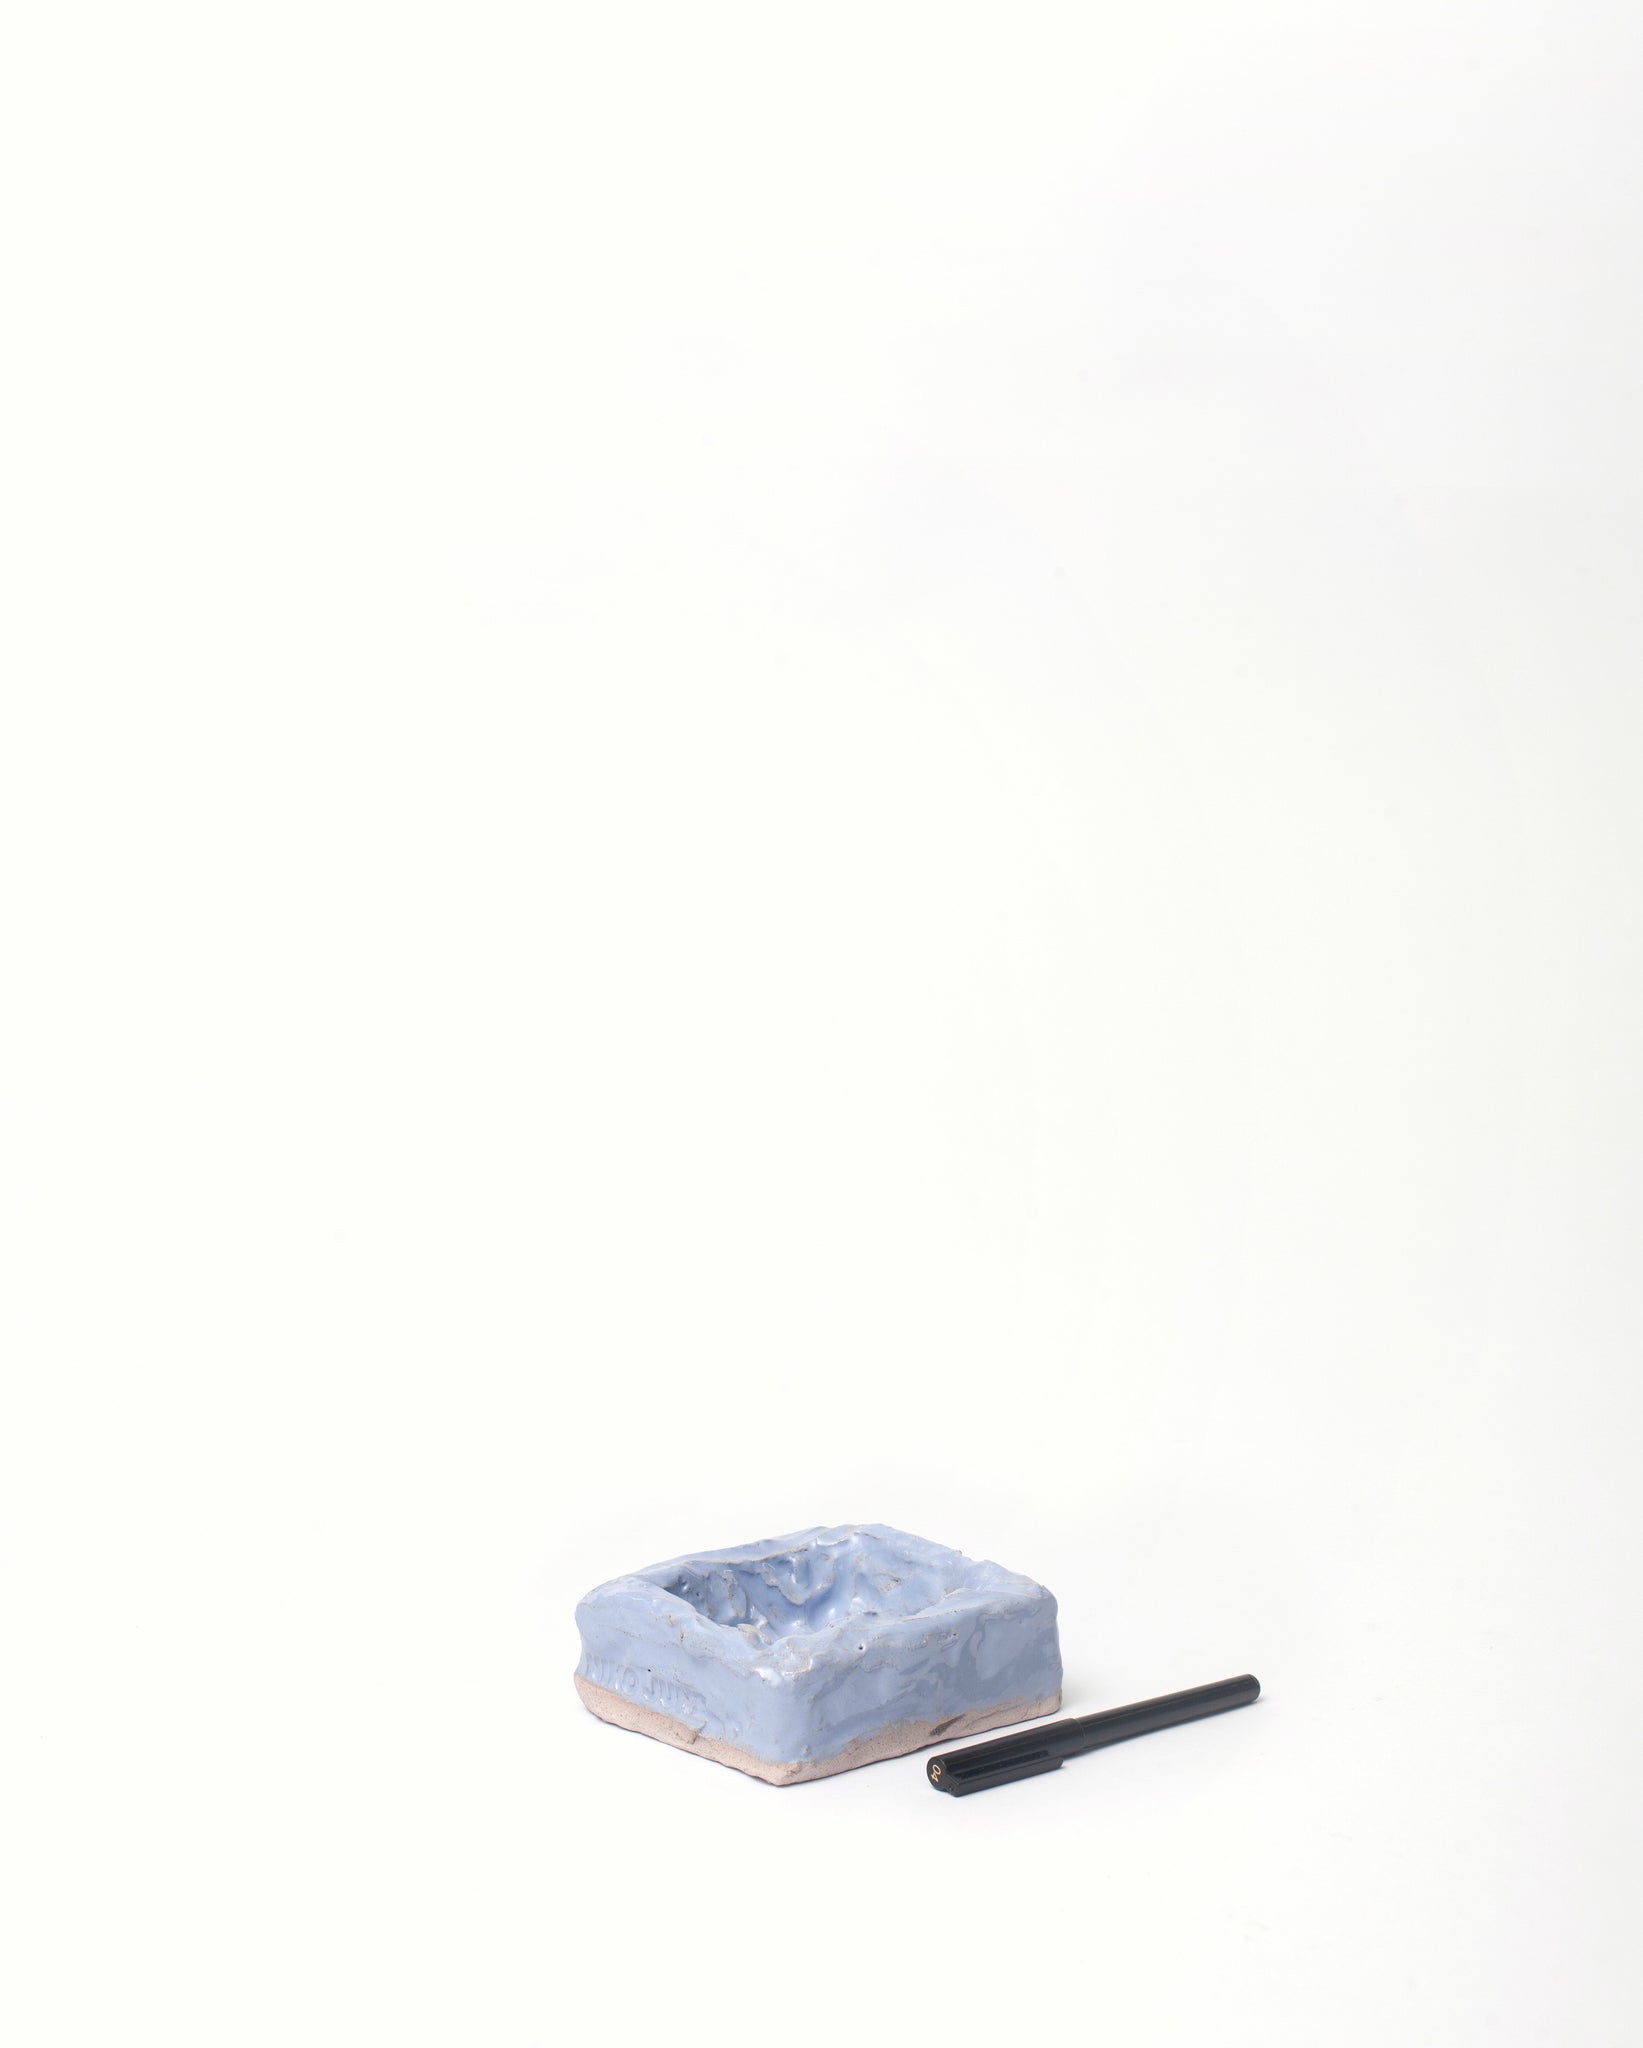 White background, Handmade jewelry ceramic organizer light blue base in slanted position with black pen on the side